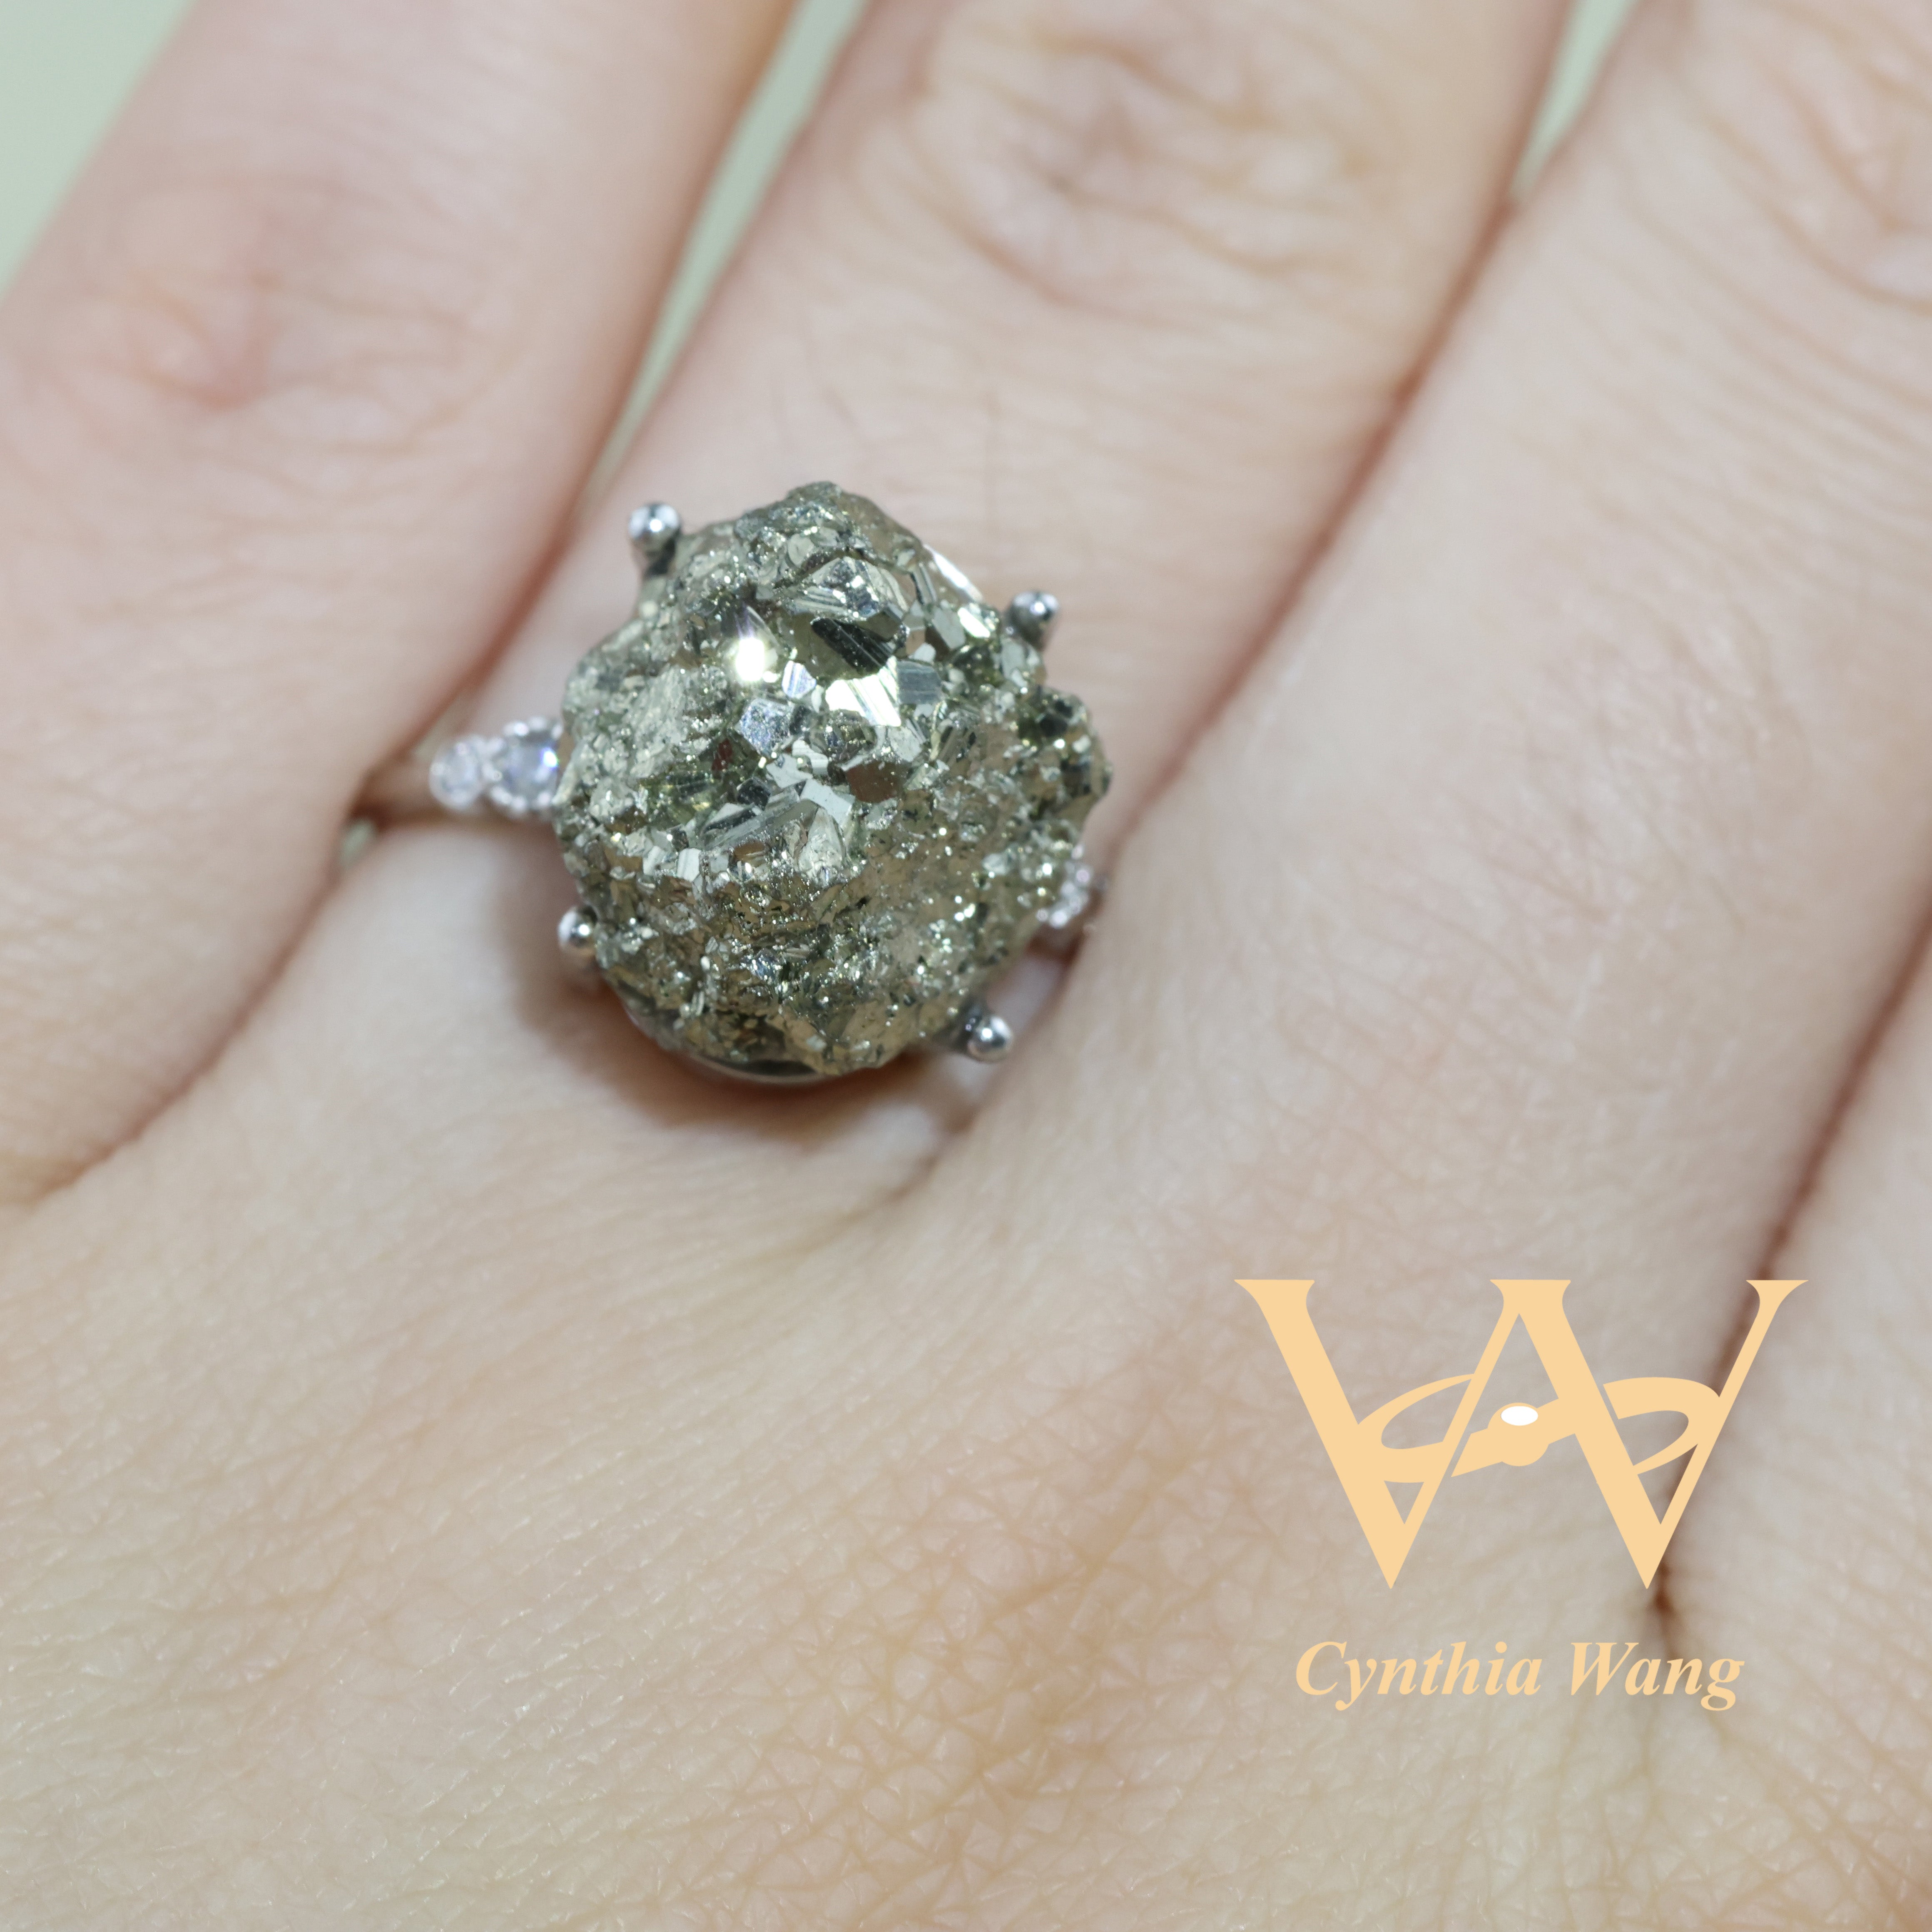 'Sparkling Haven' Pyrite Ring